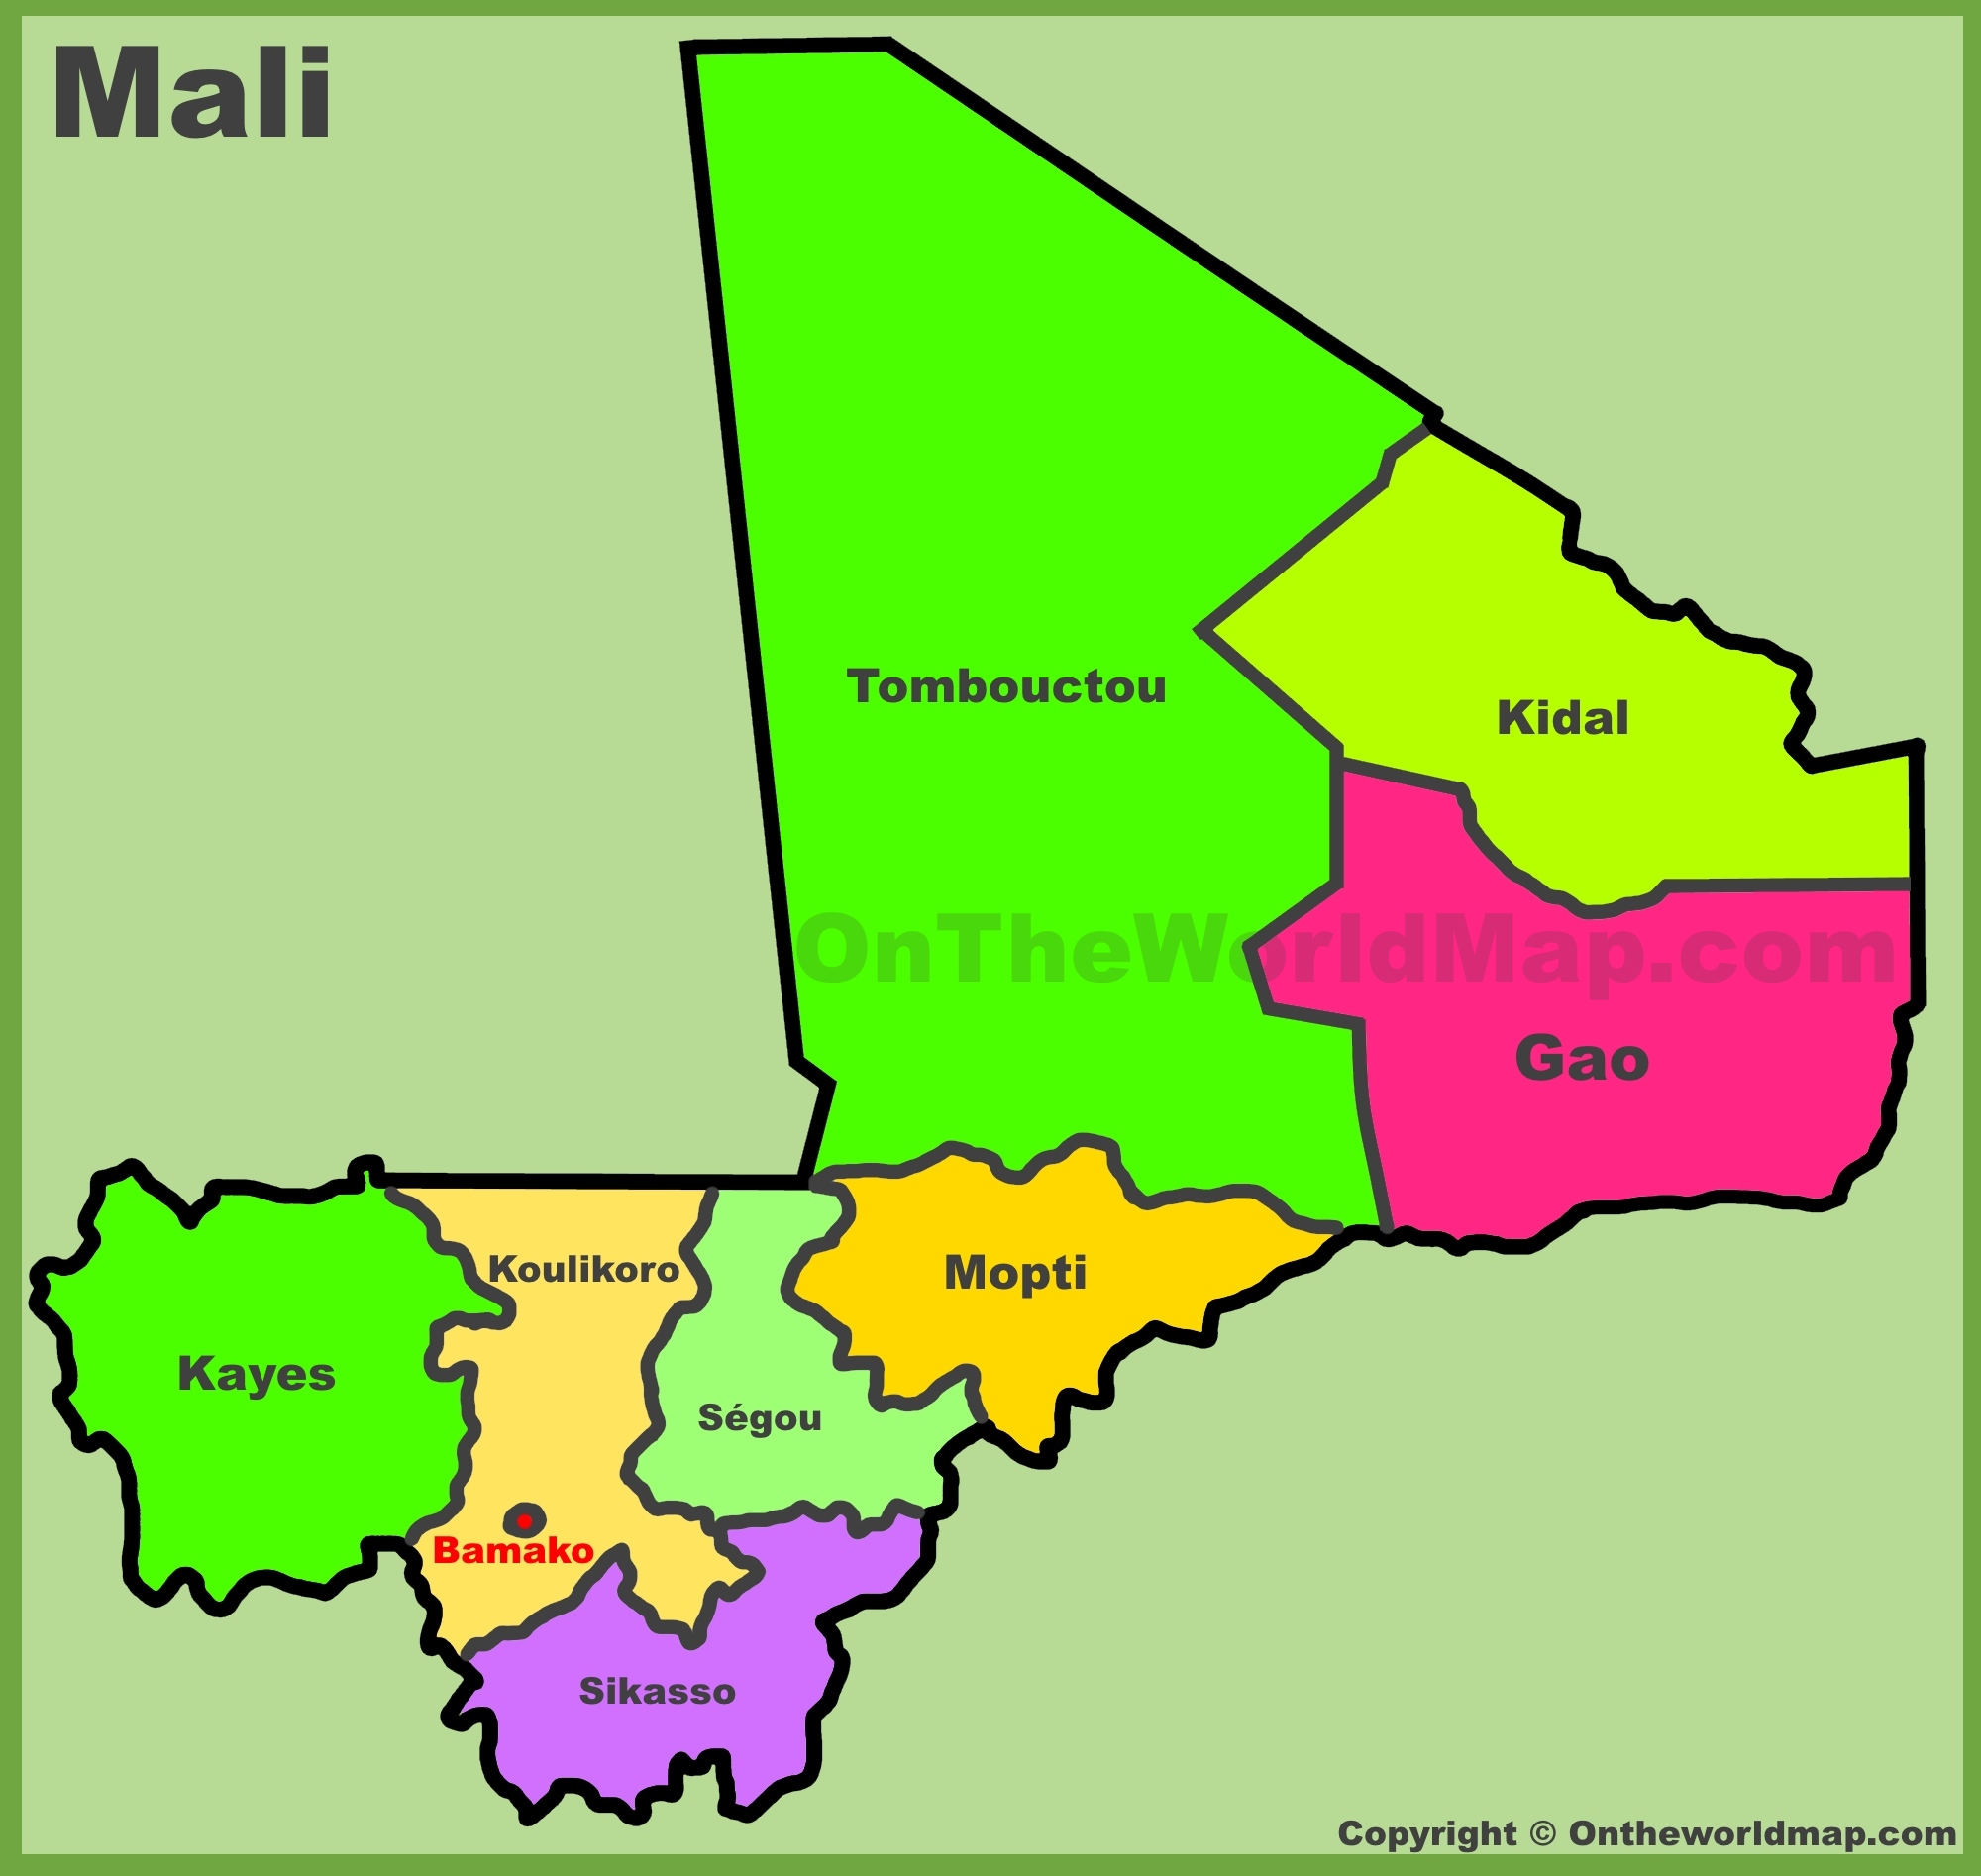 Image result for mali map